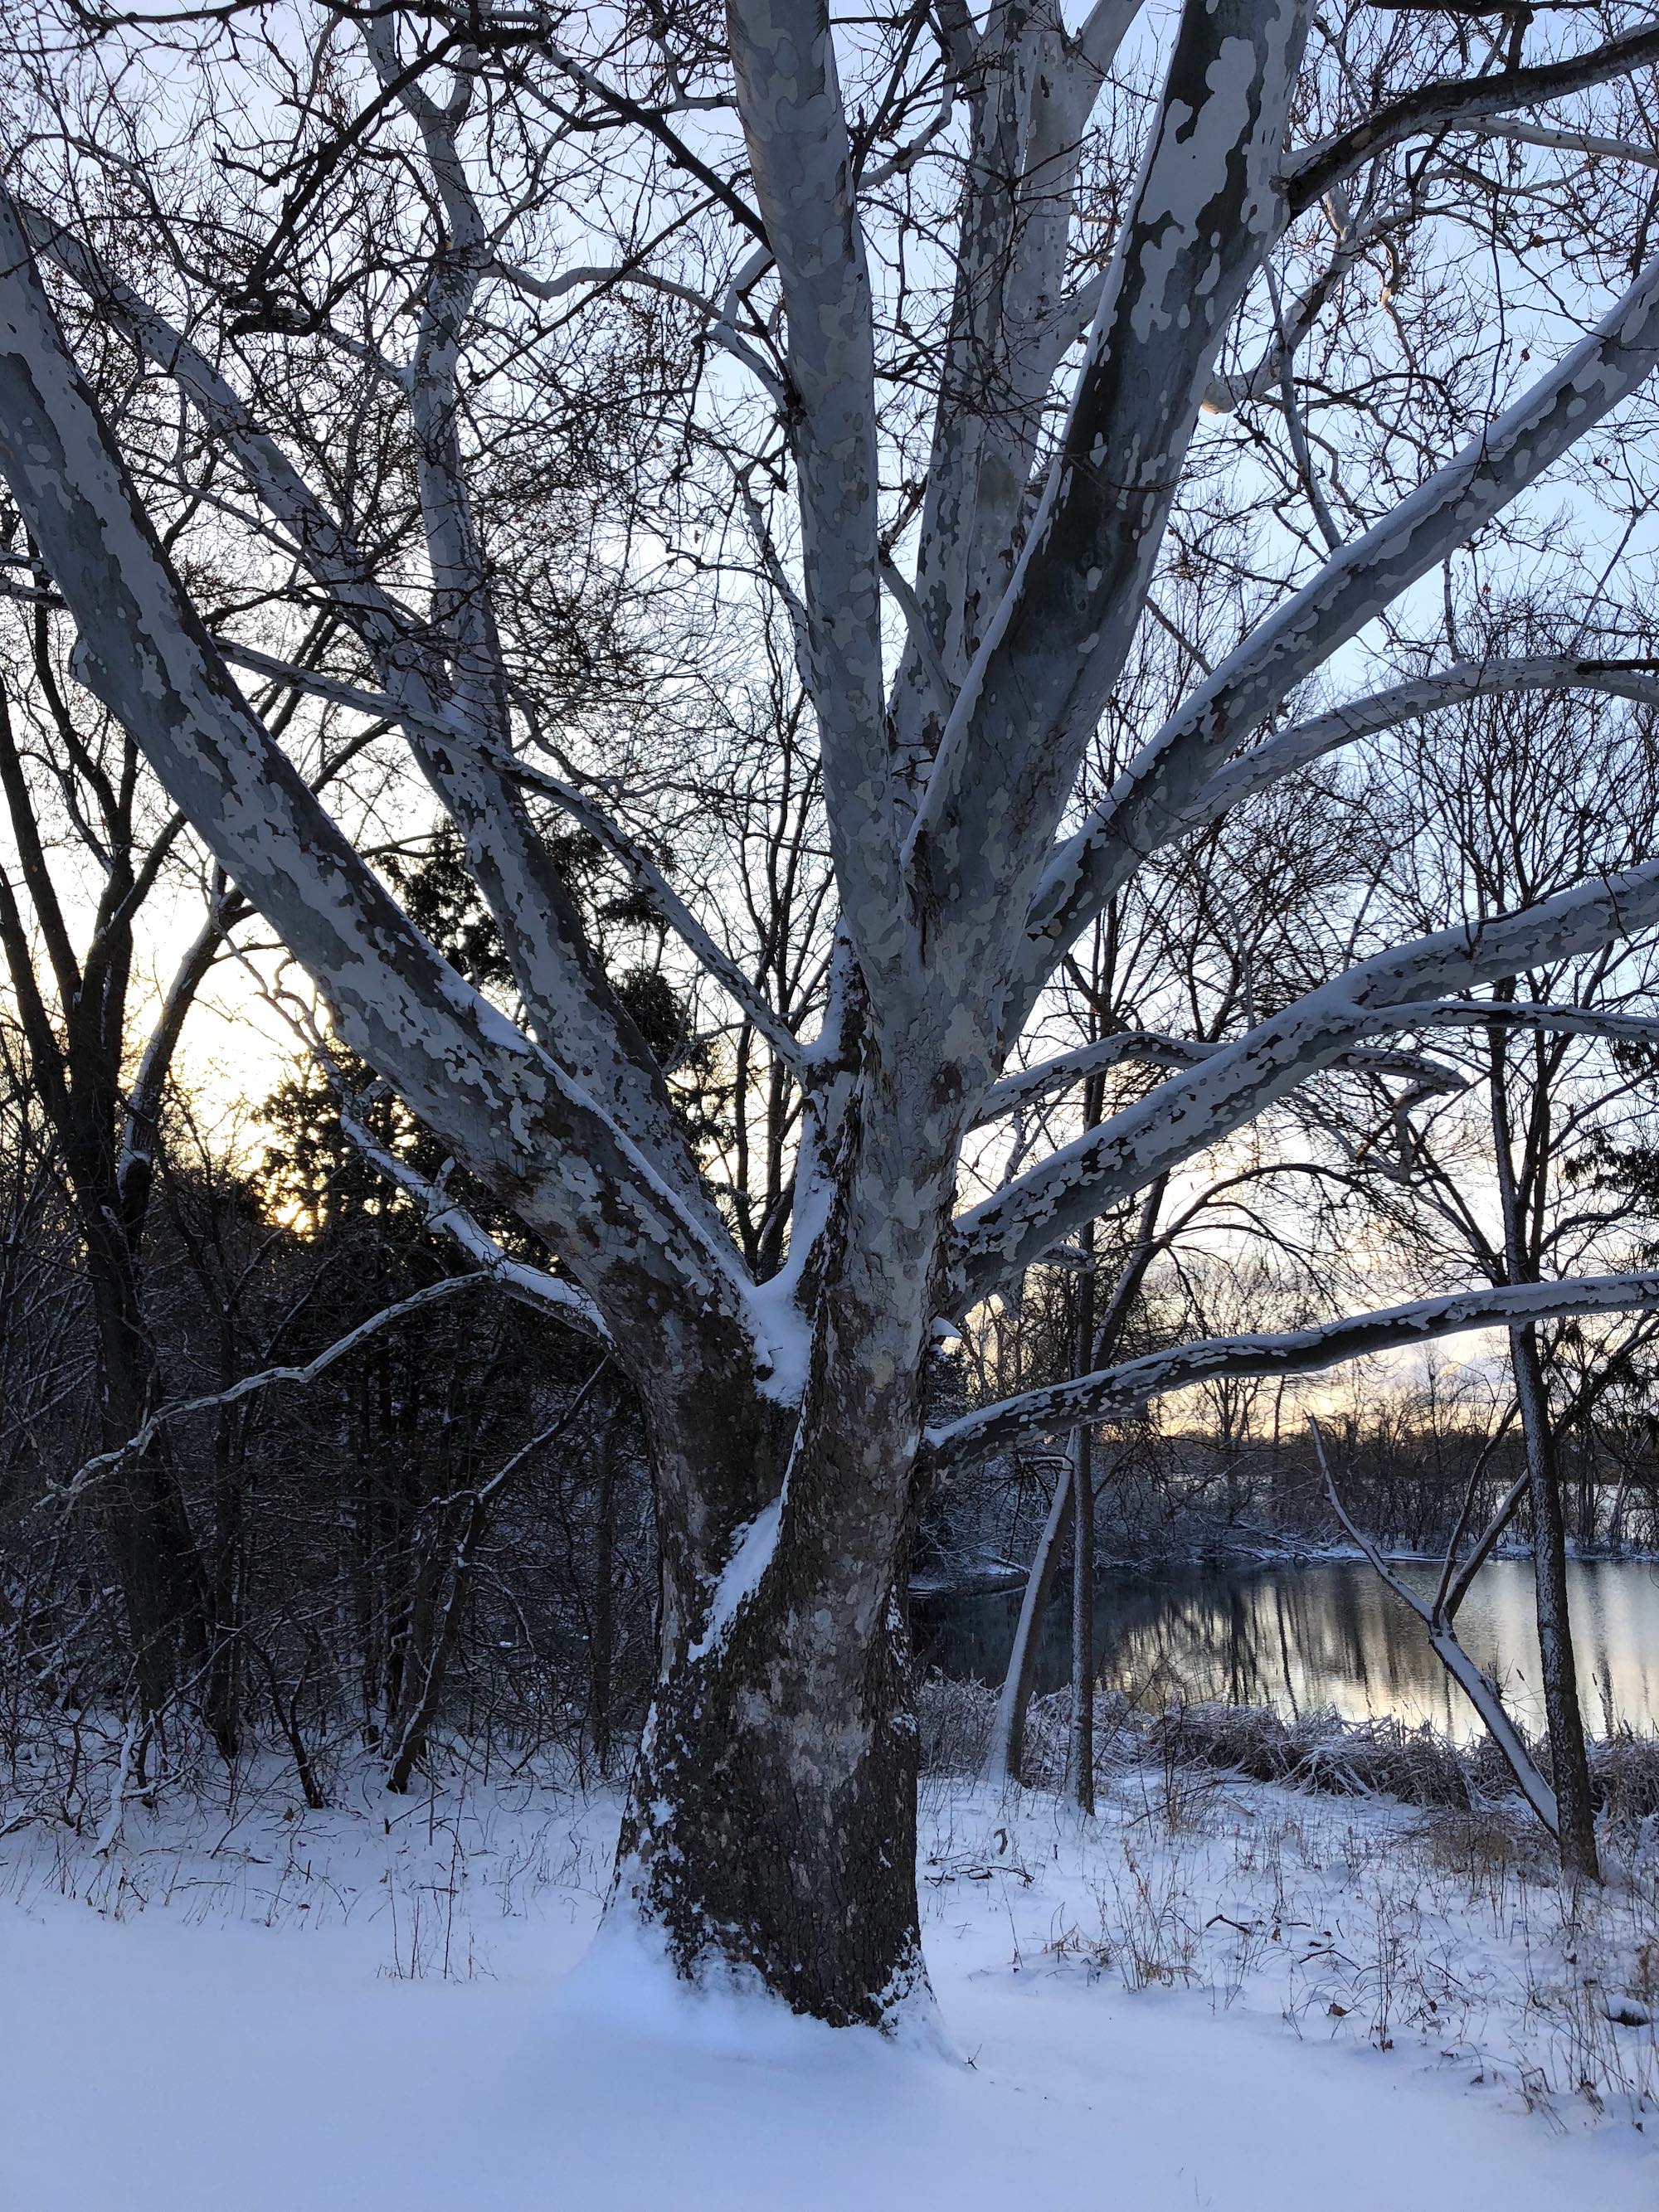 Sycamore tree between Ho-Nee-Um Pond and Arbor Drive on north shore of Lake Wingra on April 4, 2018.